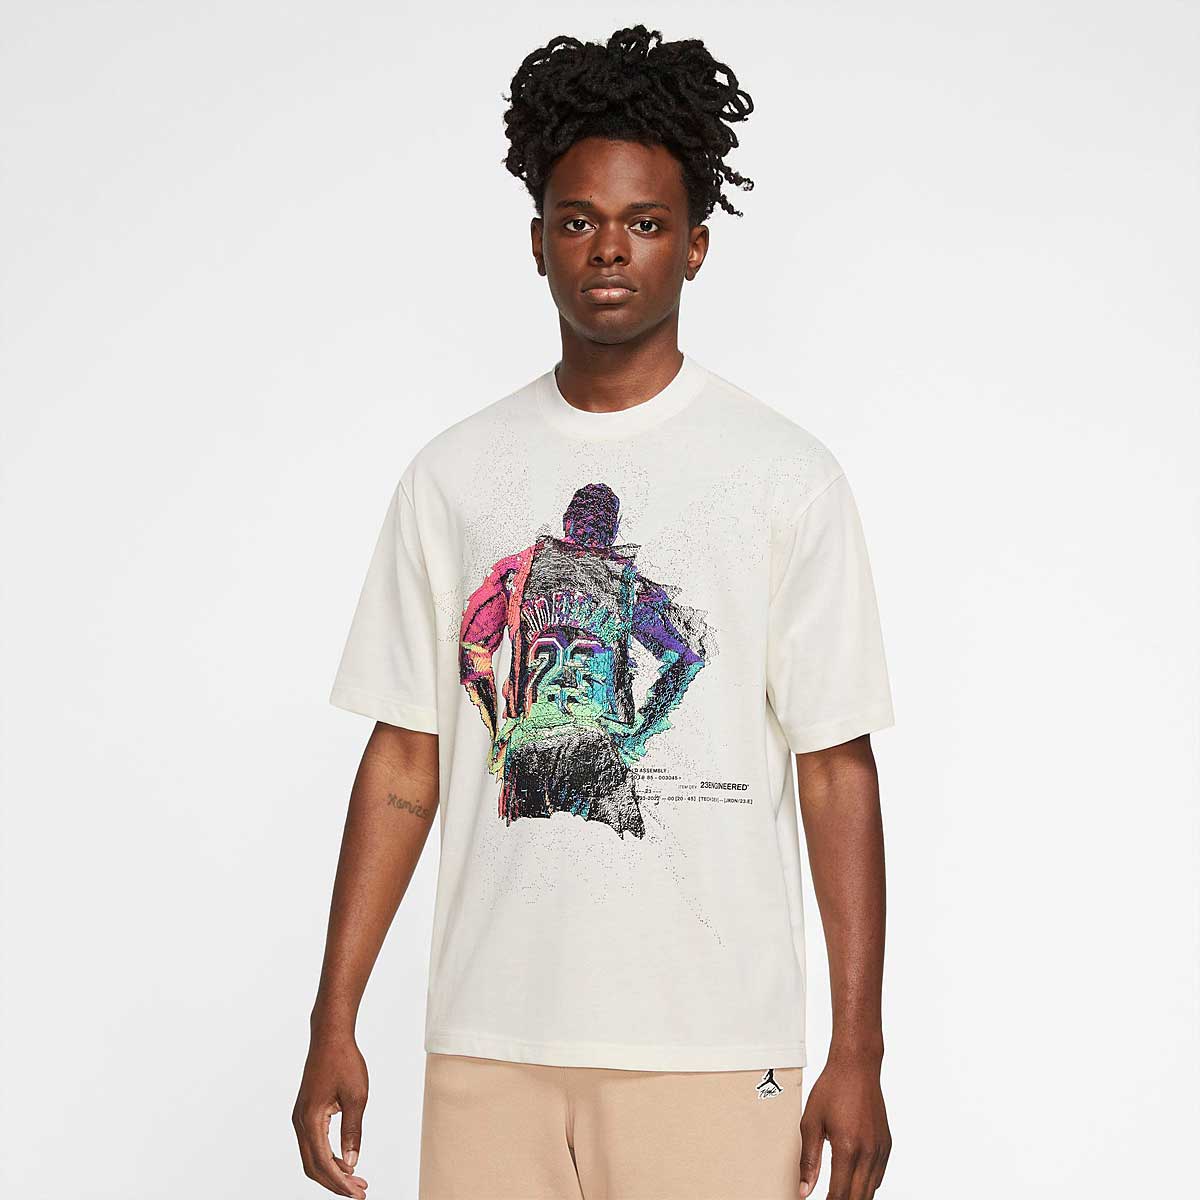 Buy 23ENG STATEMENT 85 CREW T-SHIRT for N/A 0.0 on KICKZ.com!